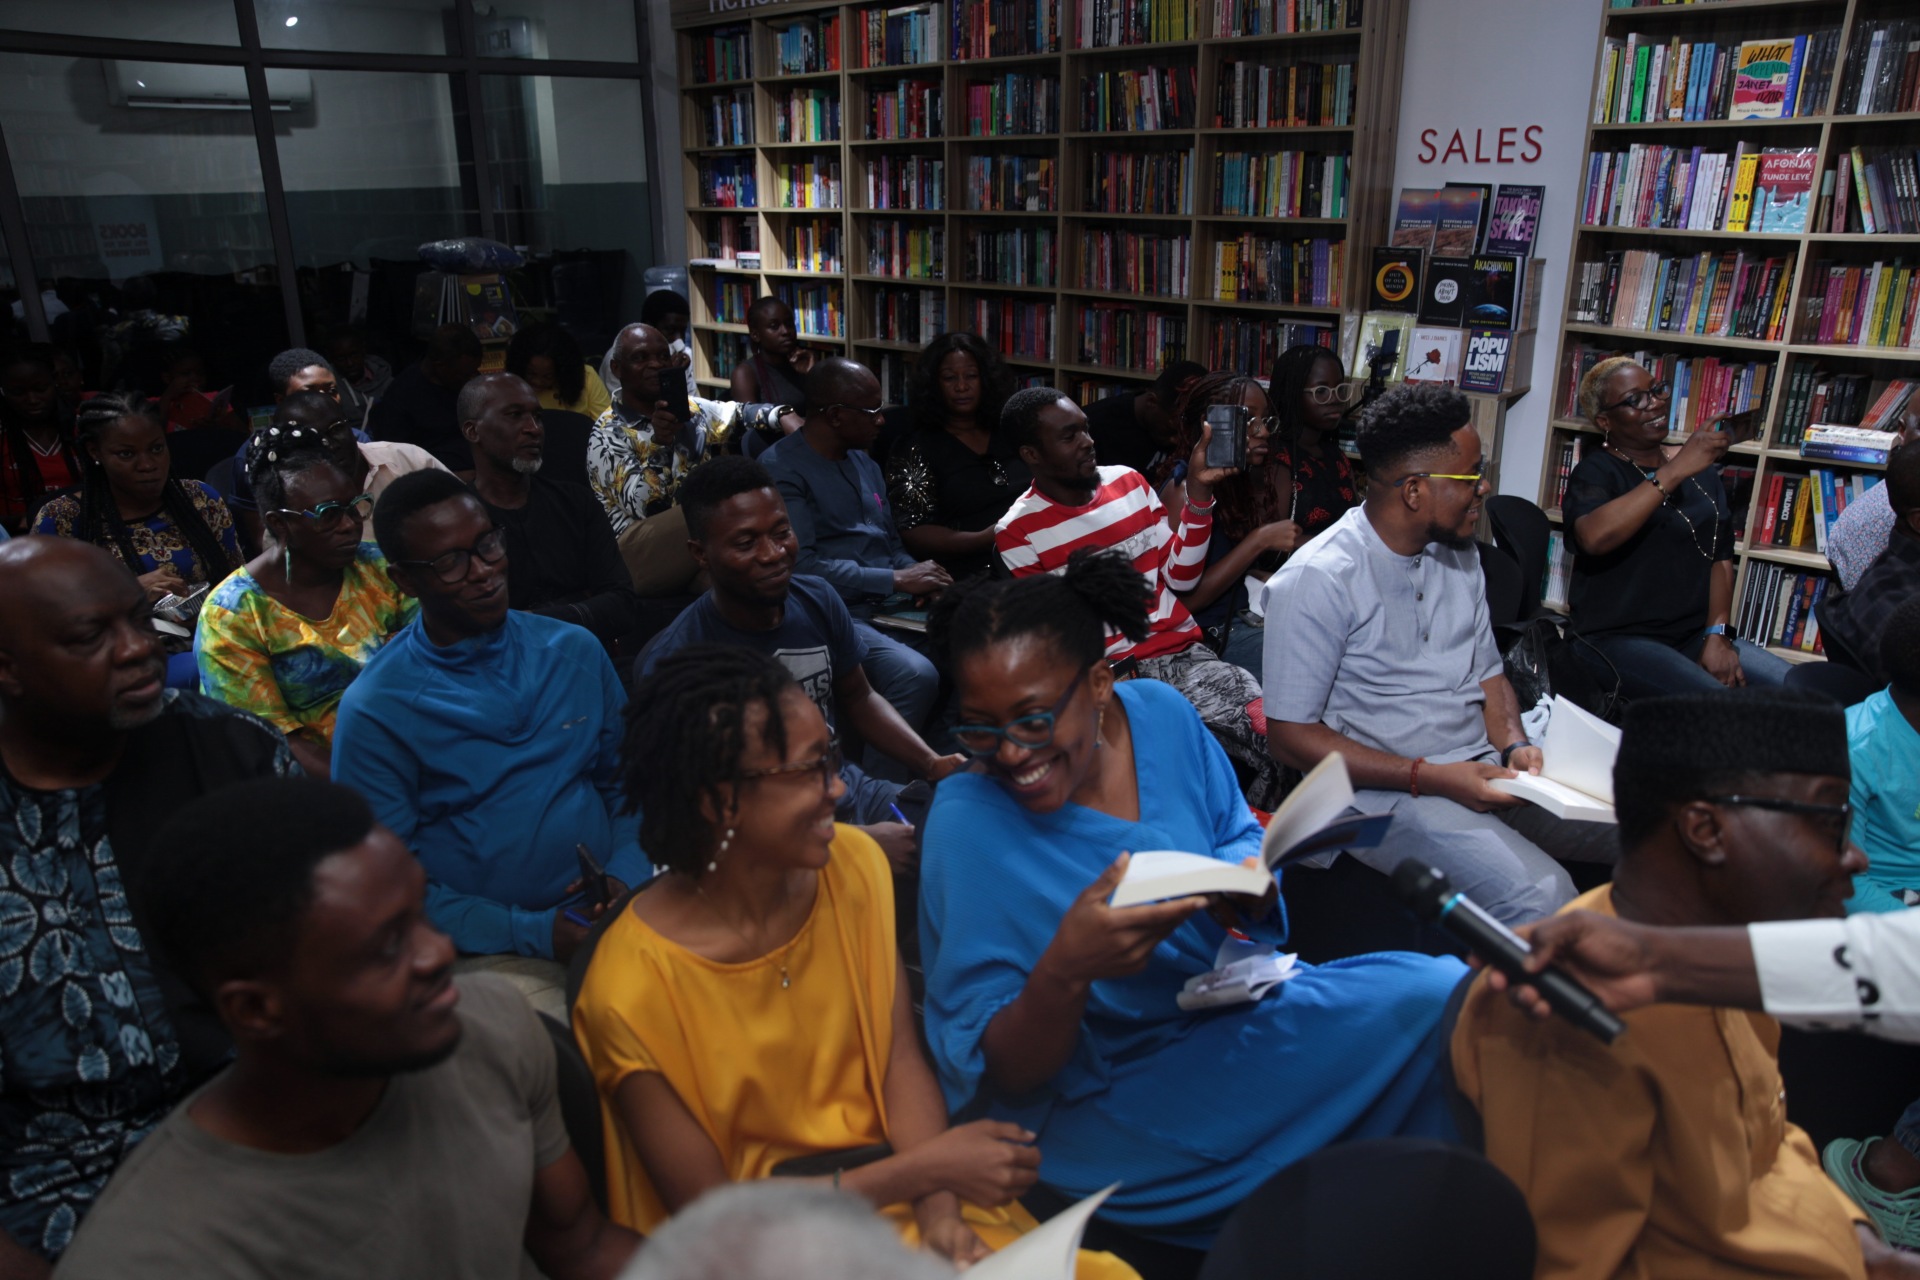 The audience at the book reading of Okey Ndibe